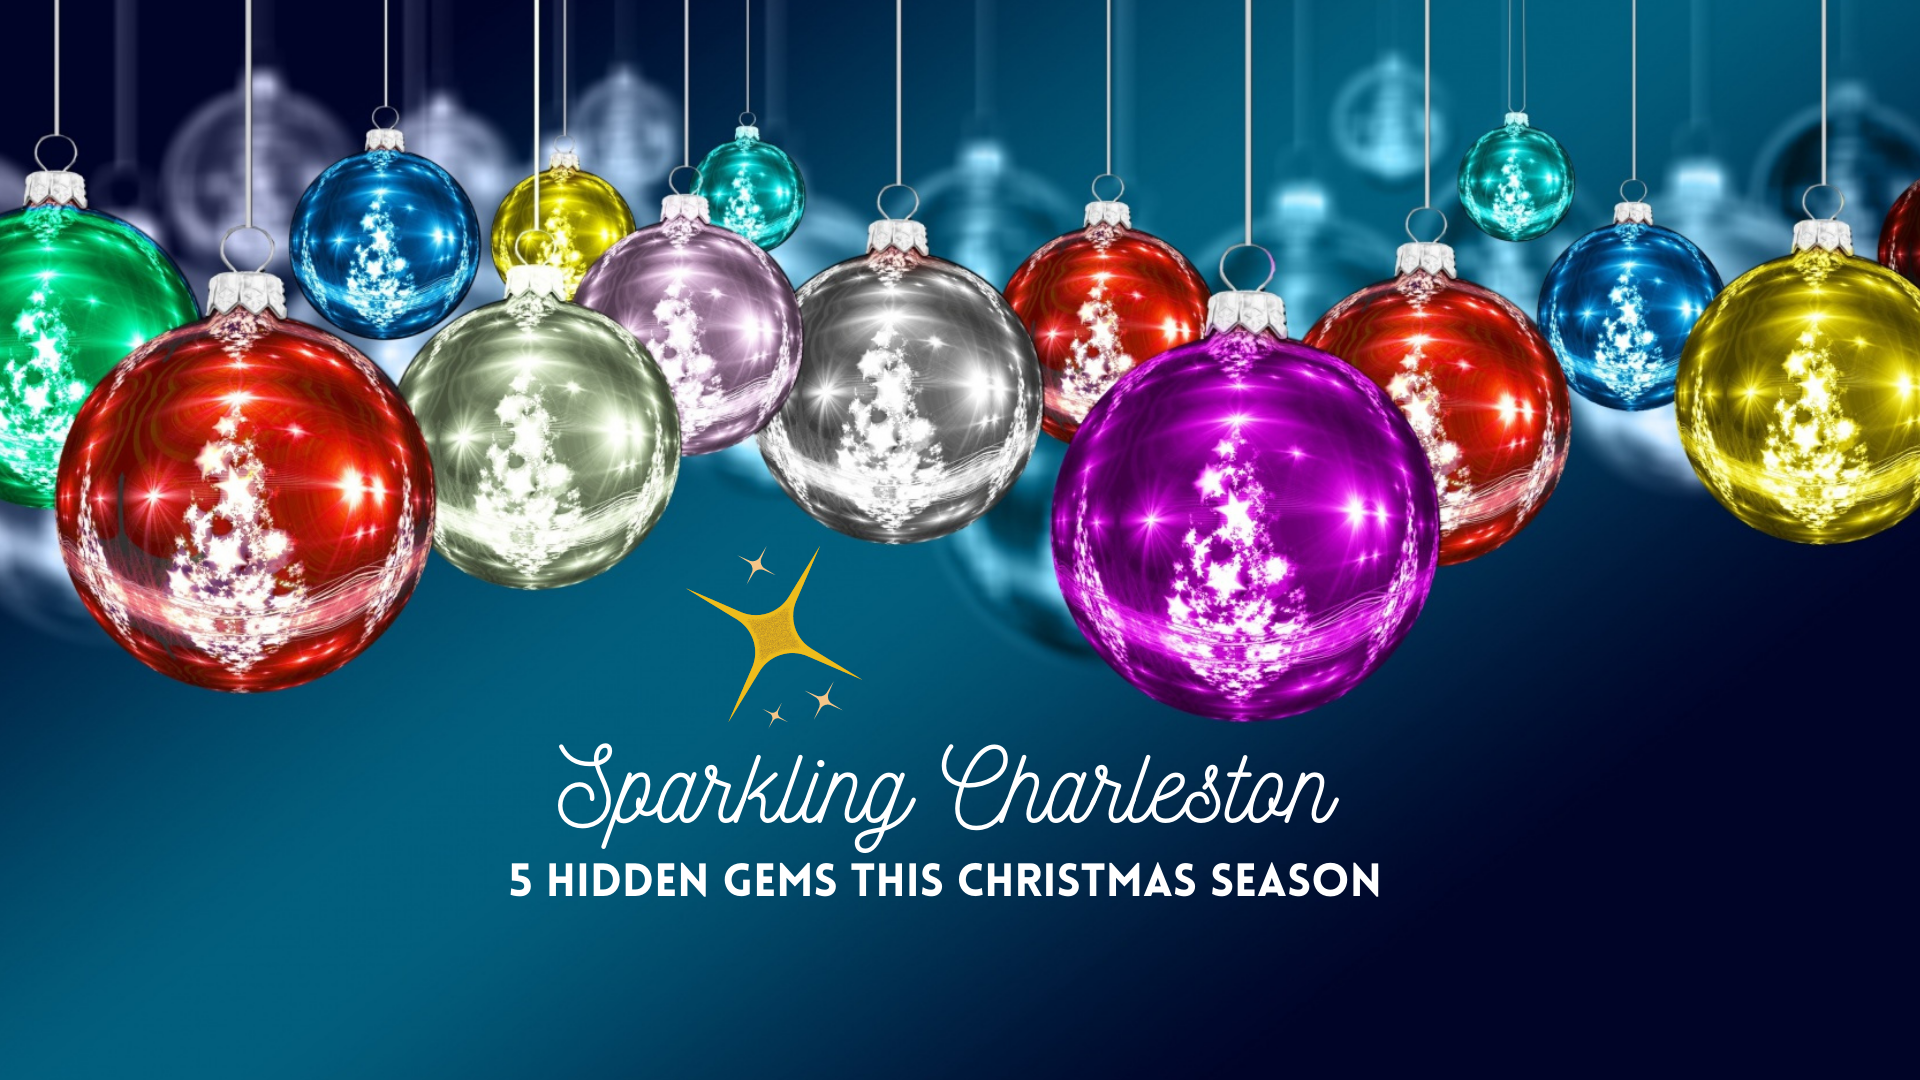 Sparkling Charleston | Top 5 Hidden Gems That Will Give You That Christmas Glow